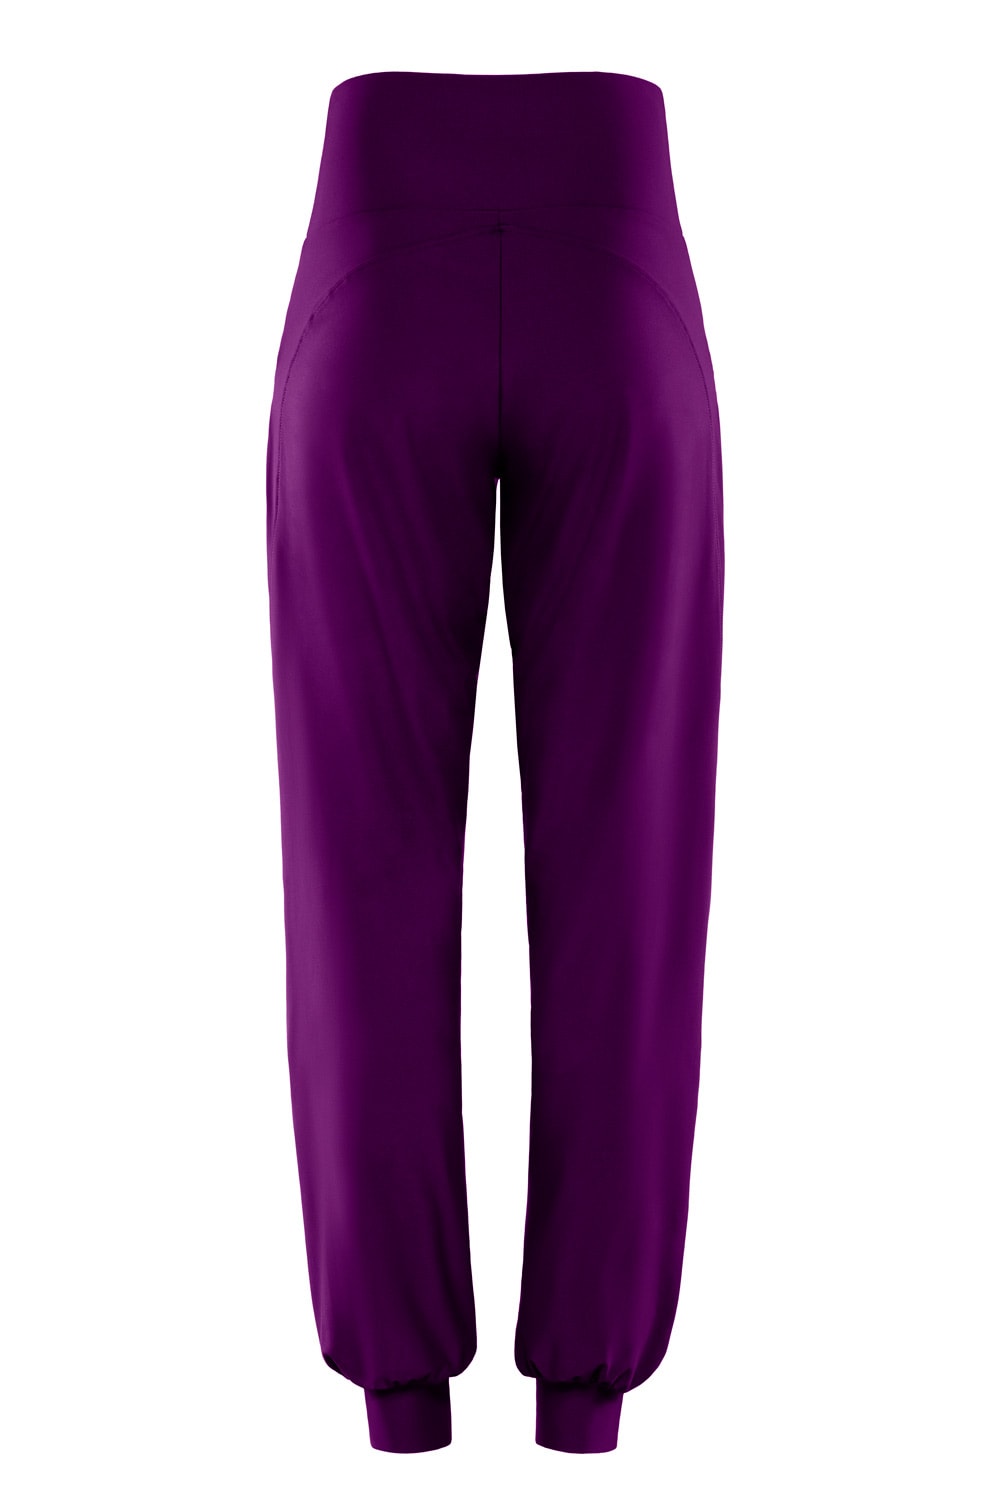 Finde Winshape Sporthose »Functional Comfort Trousers auf Leisure High Time LEI101C«, Waist